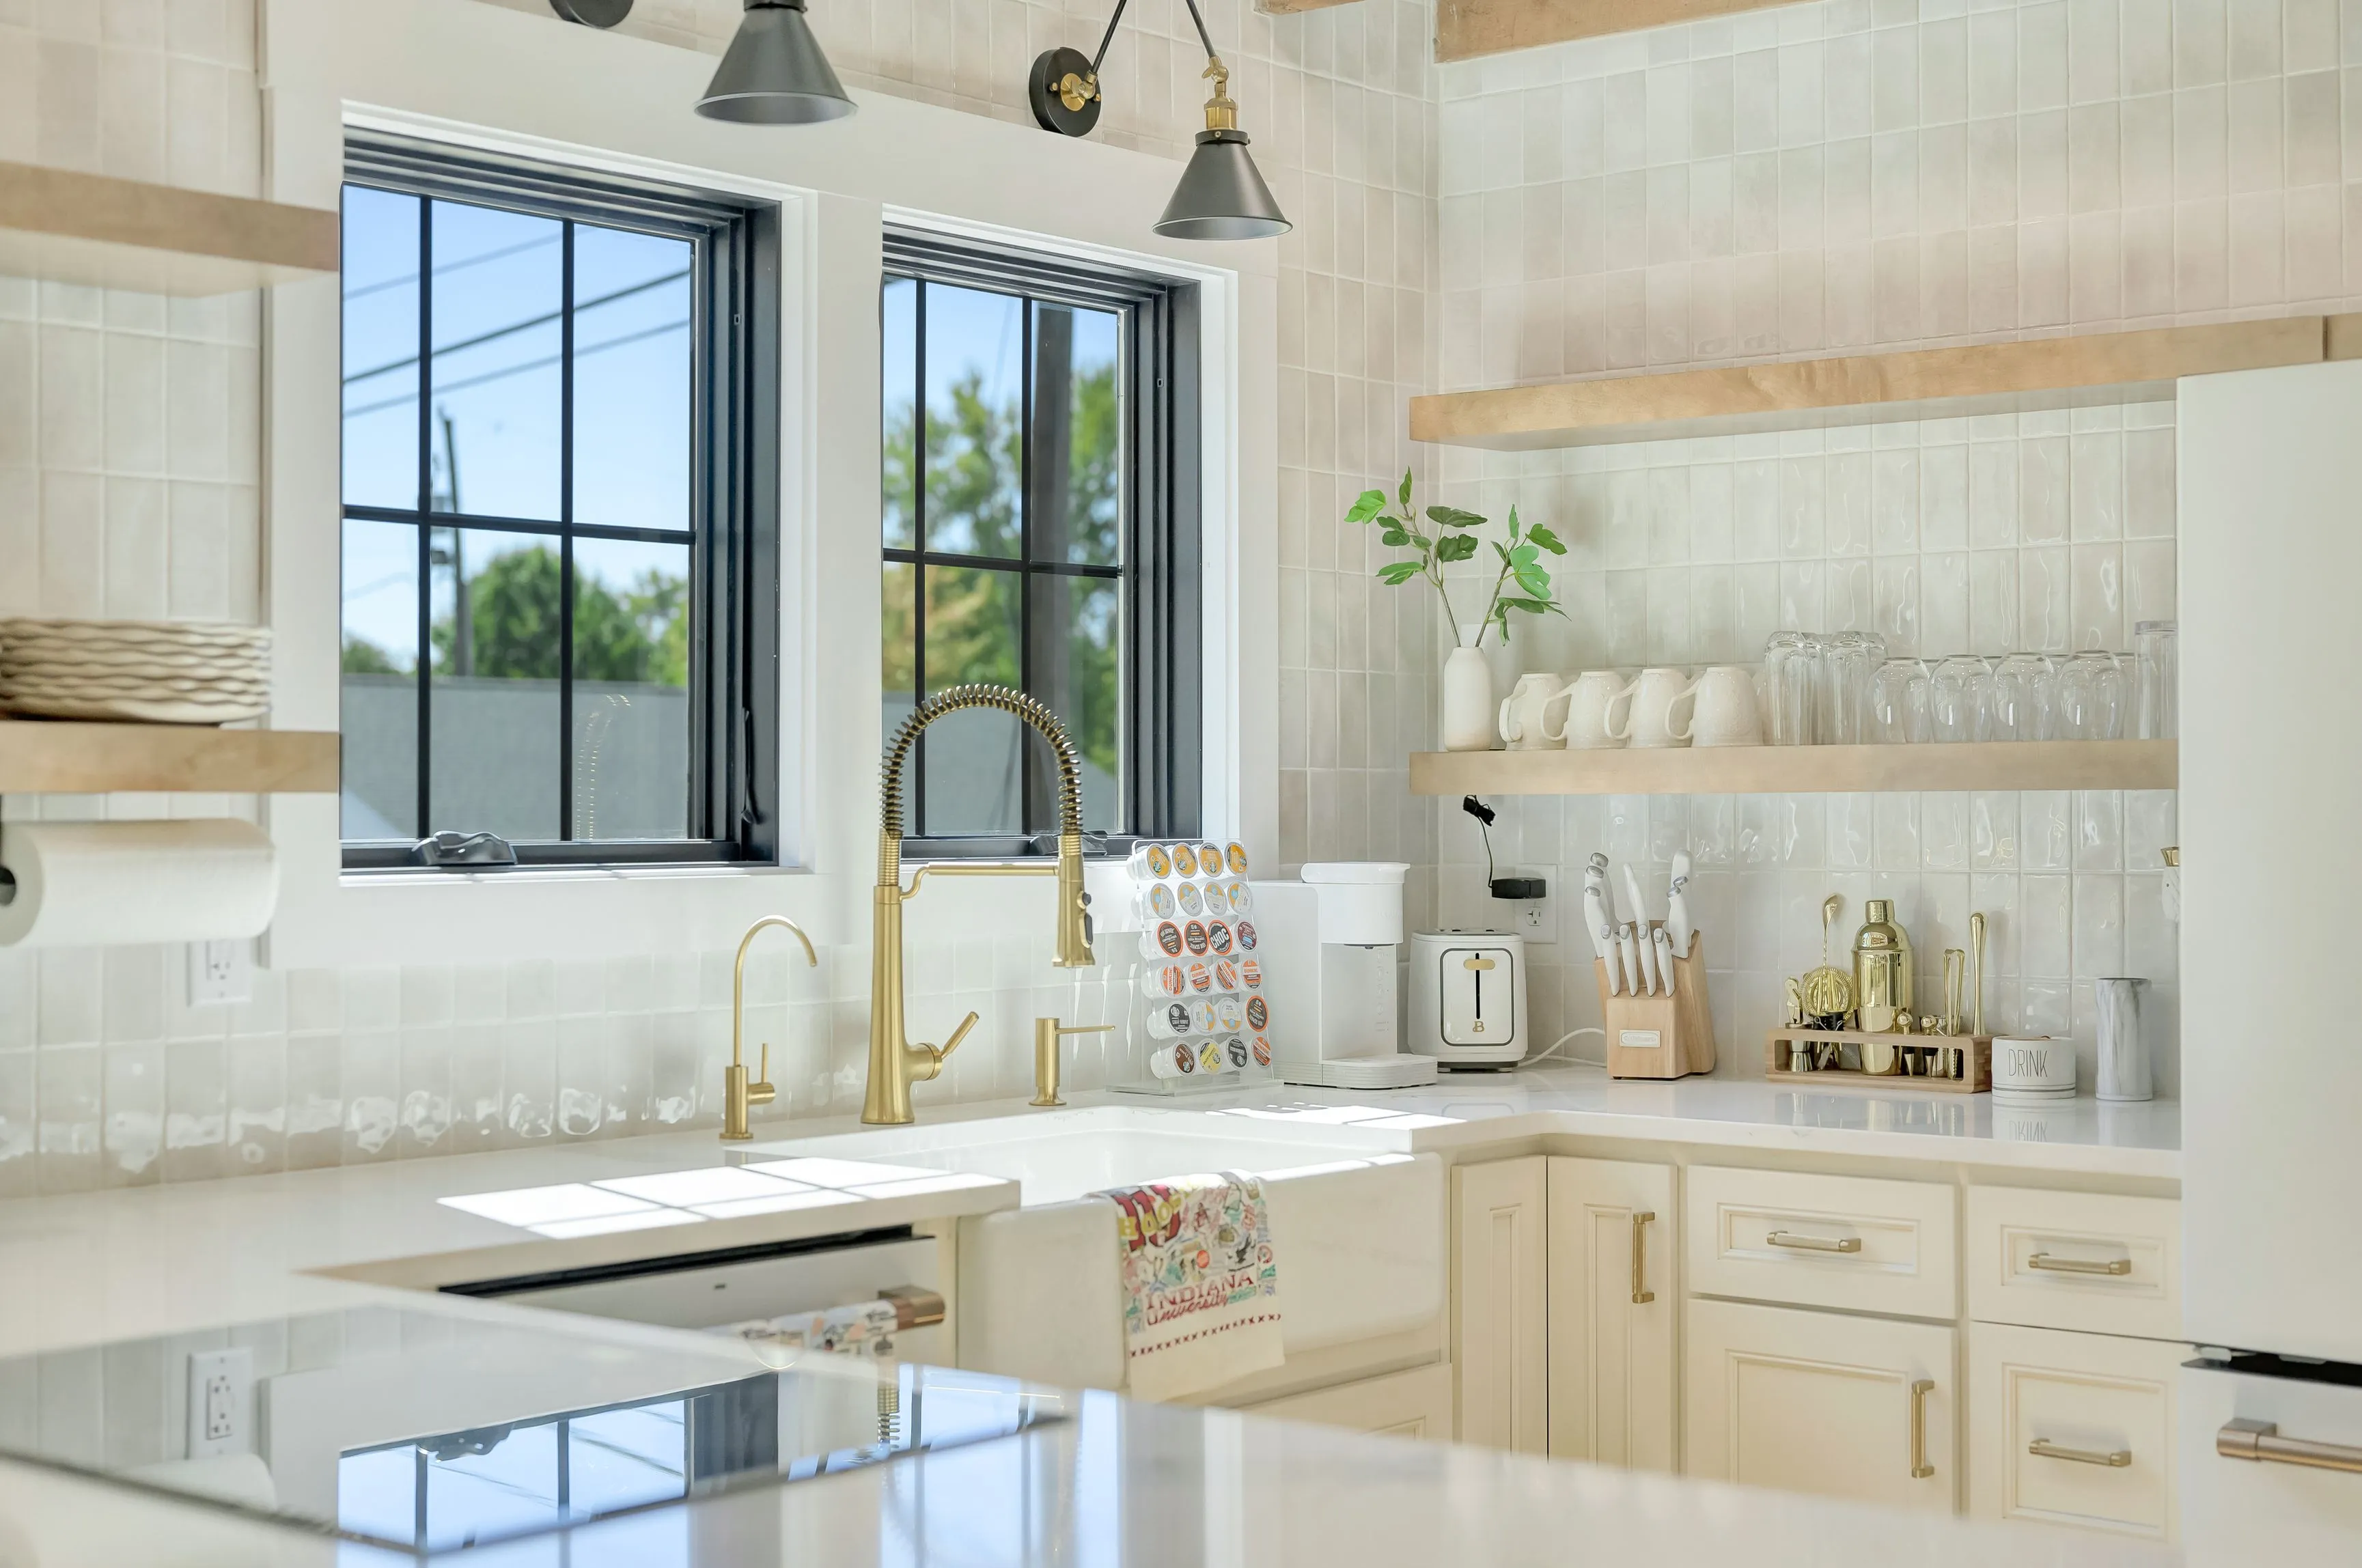 Bright modern kitchen interior with white countertops, brass fixtures, and floating wooden shelves.